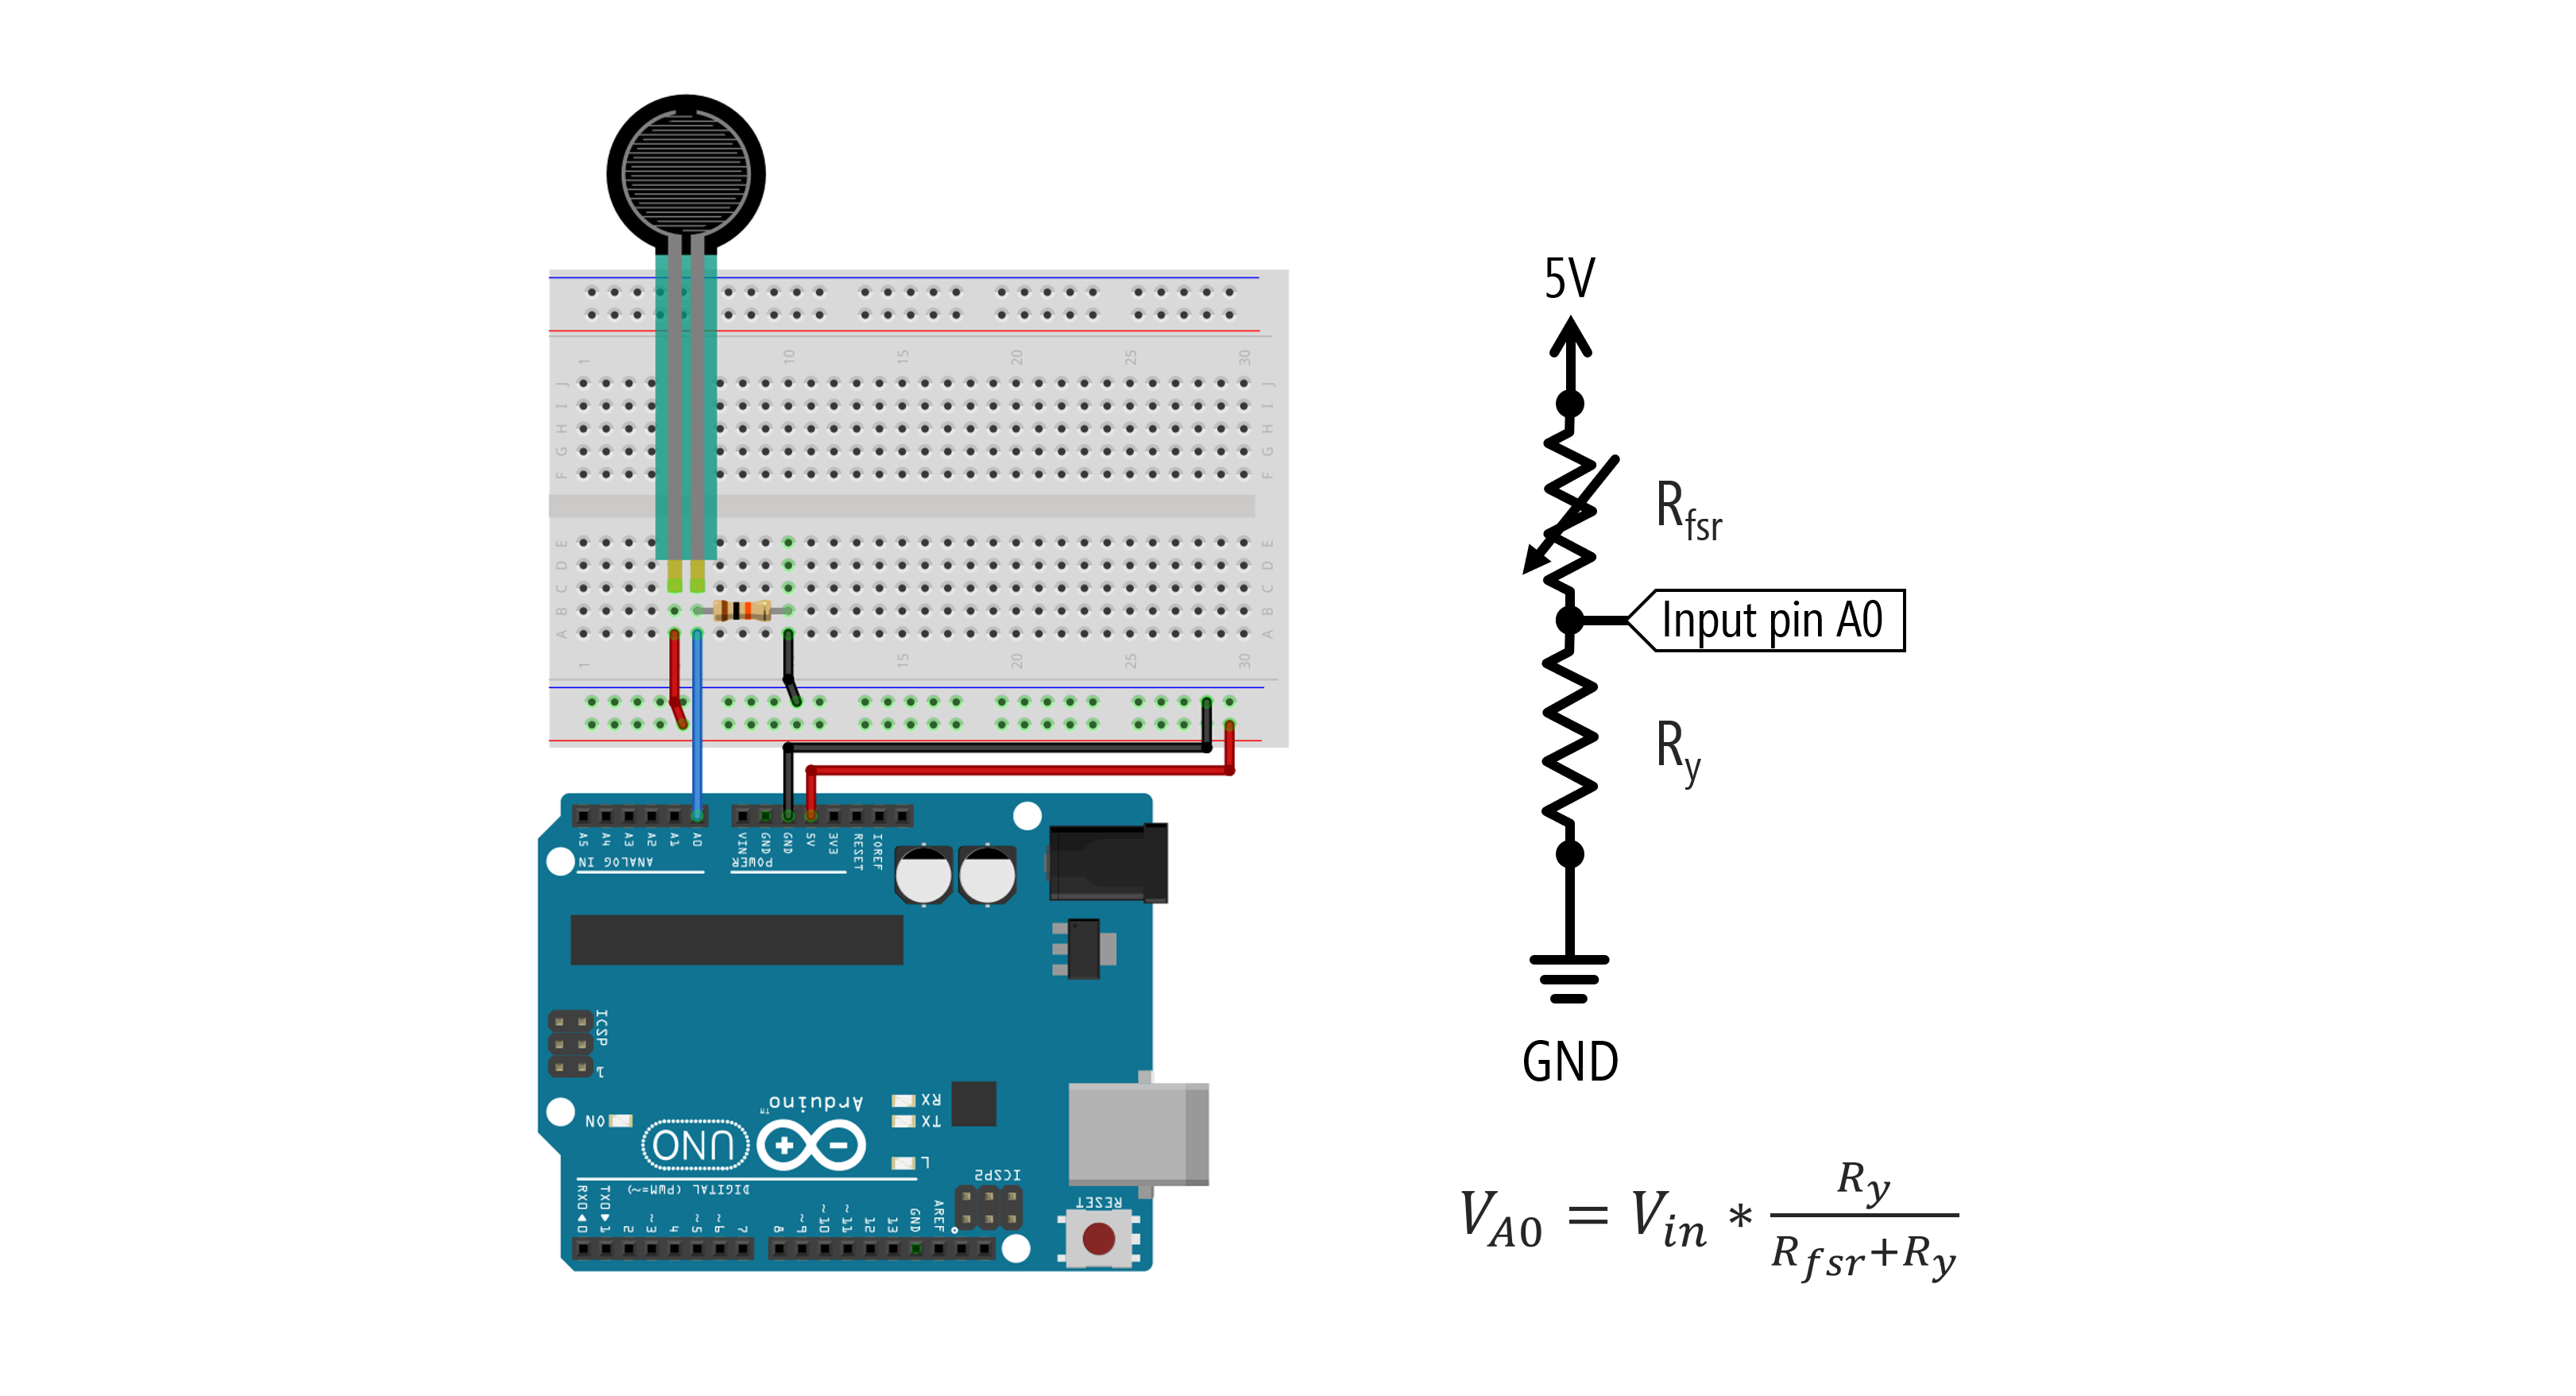 FSR wiring diagram for Arduino Uno with FSR Leg 1 hooked to 5V, and Leg 2 hooked to a fixed resistor 10kΩ in the pull-down resistor position